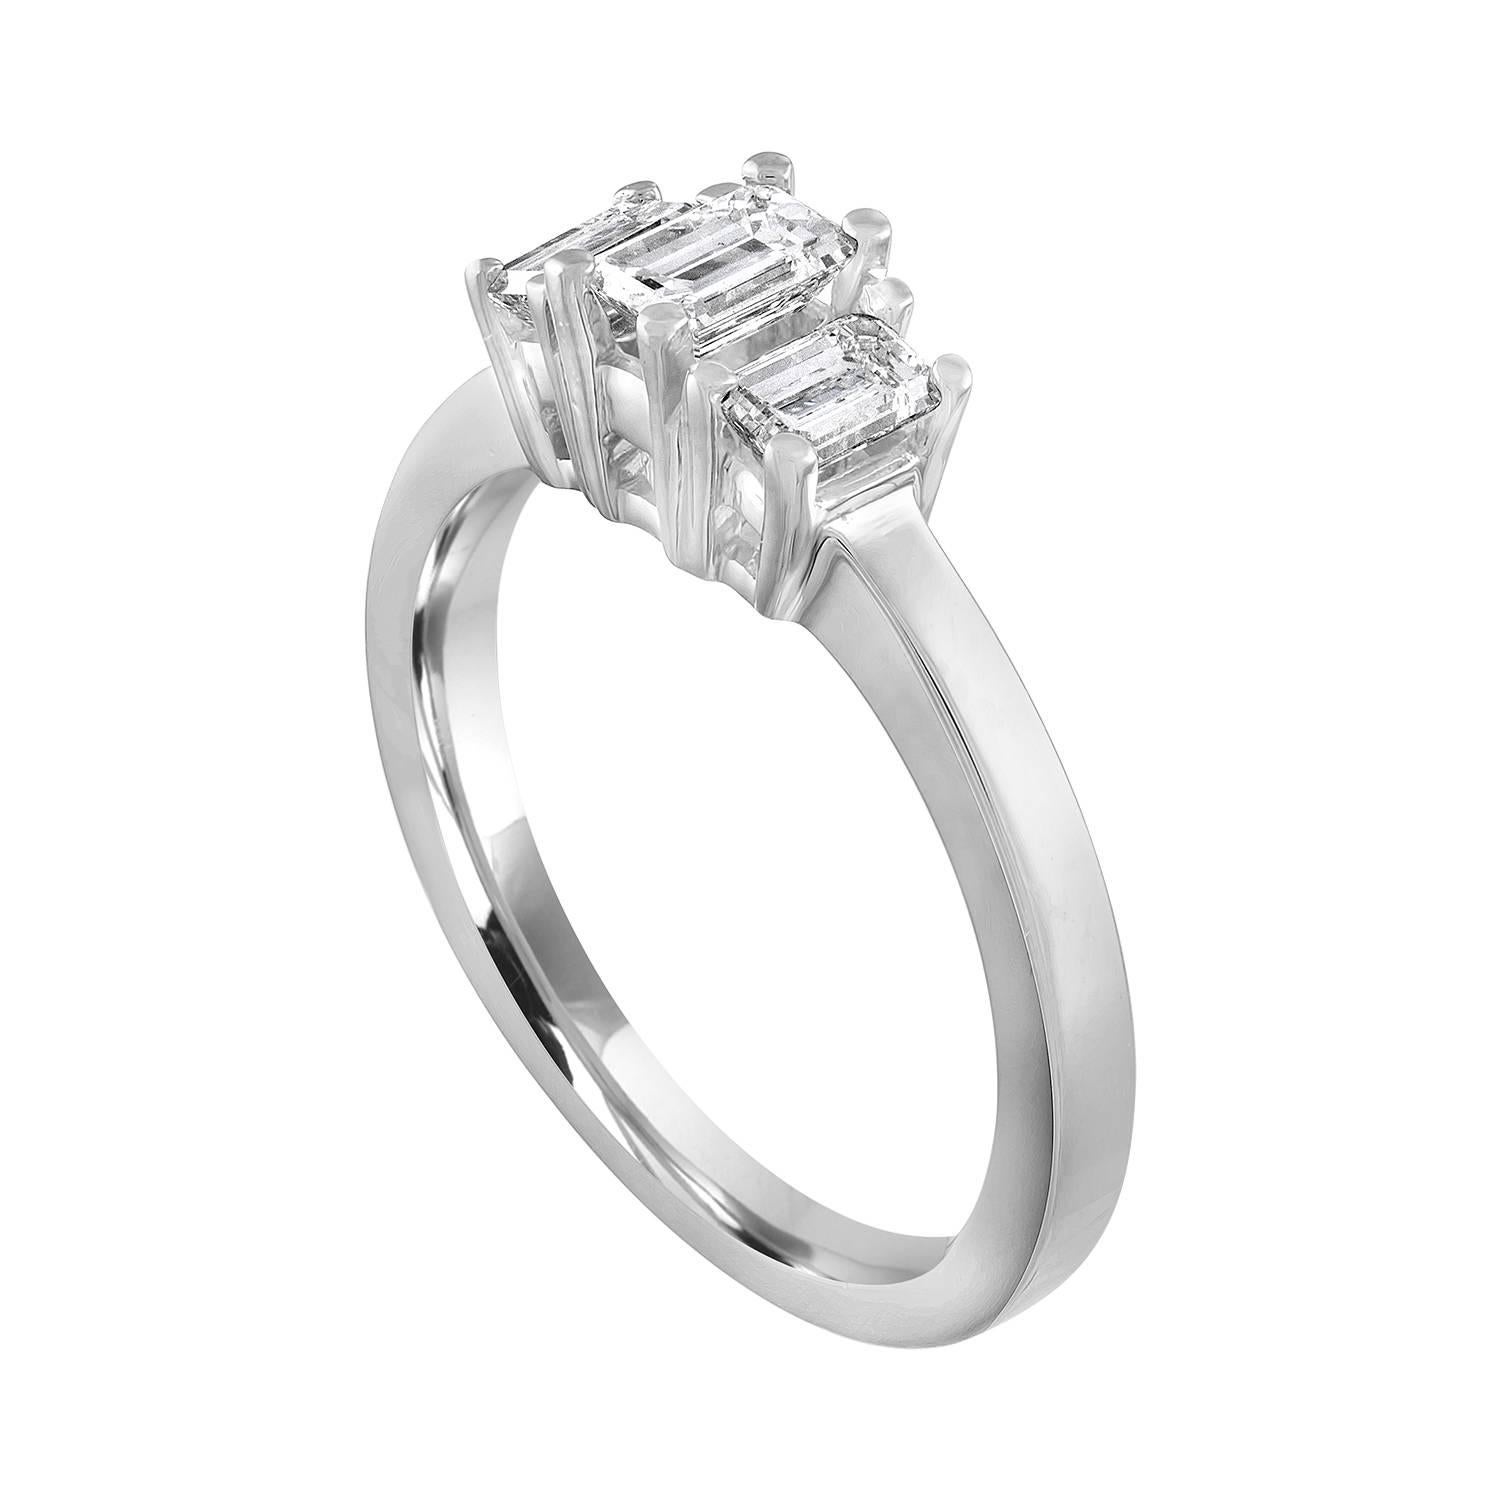 This a delicate three-stone ring.
The ring is Platinum 950.
The 3 Diamonds are Emerald Cut.
The Center stone is 0.50 Carats F VVS.
The 2 Side stones are 0.40 Carats Total Weight F VVS.
All 3 diamonds total 0.90 Carats.
The ring weighs 6.0 grams.
The